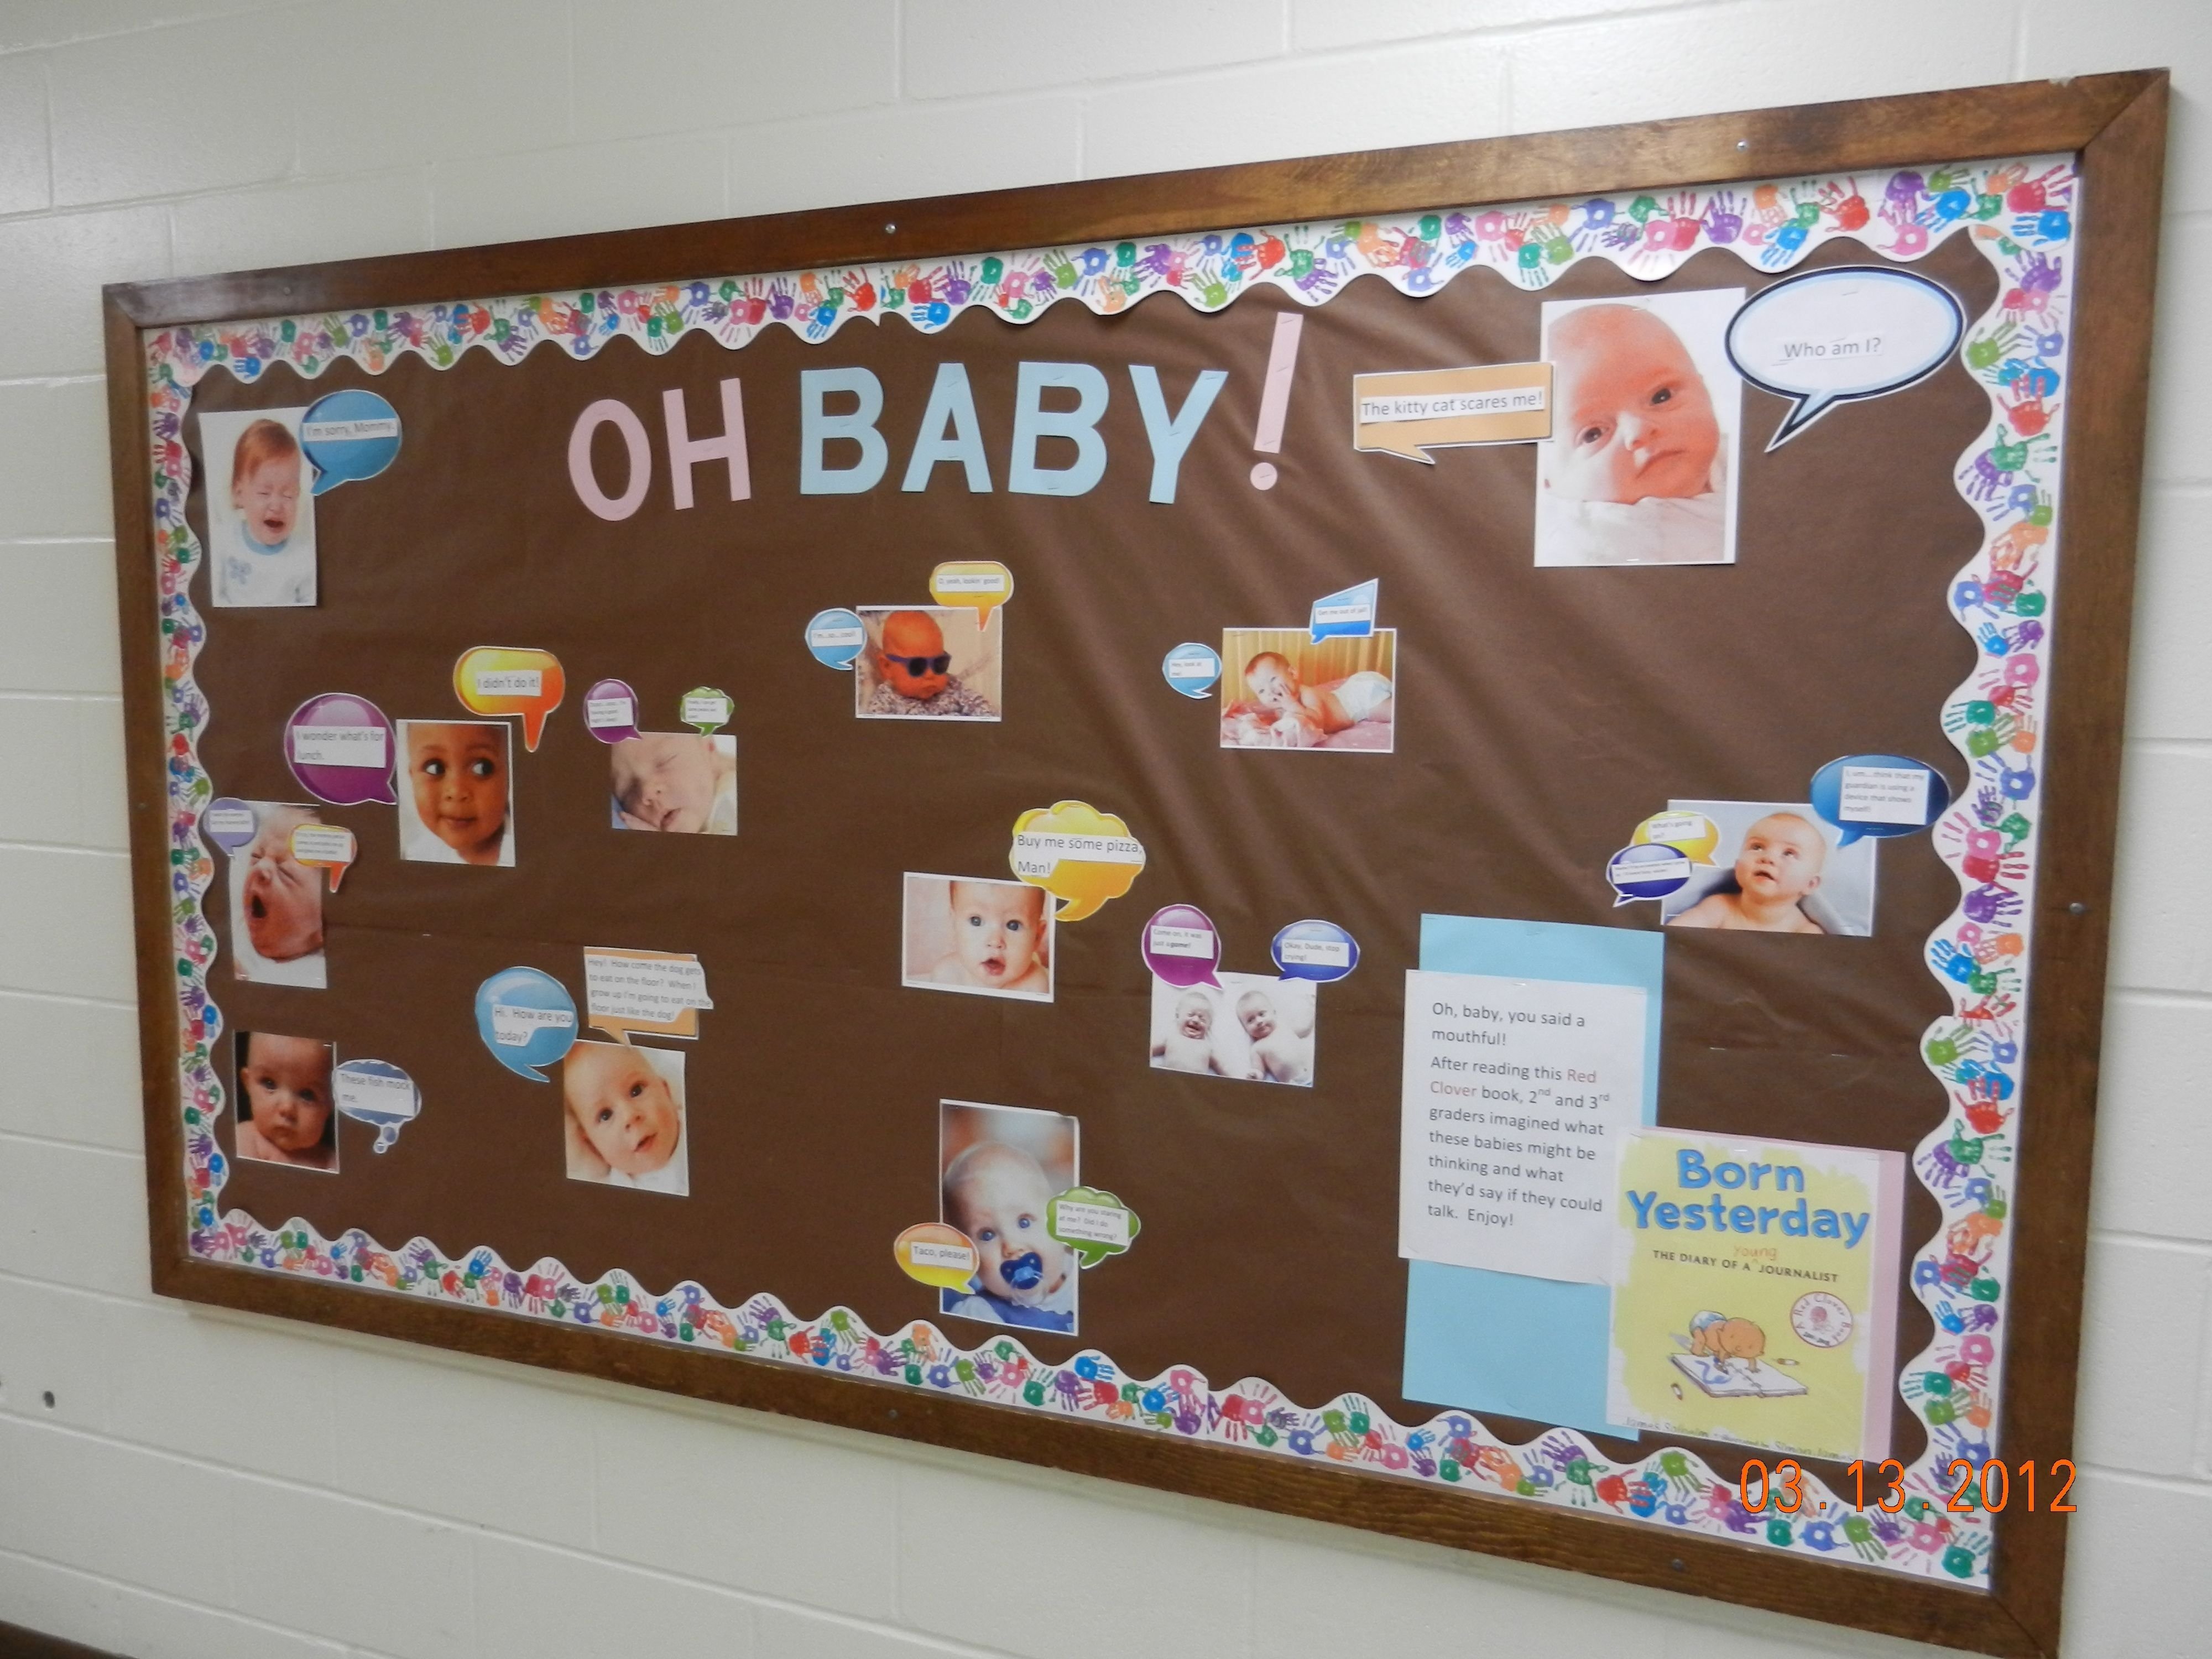 10 Fantastic Infant Room Bulletin Board Ideas pinv n on bulletin board pinterest early childhood and 2023